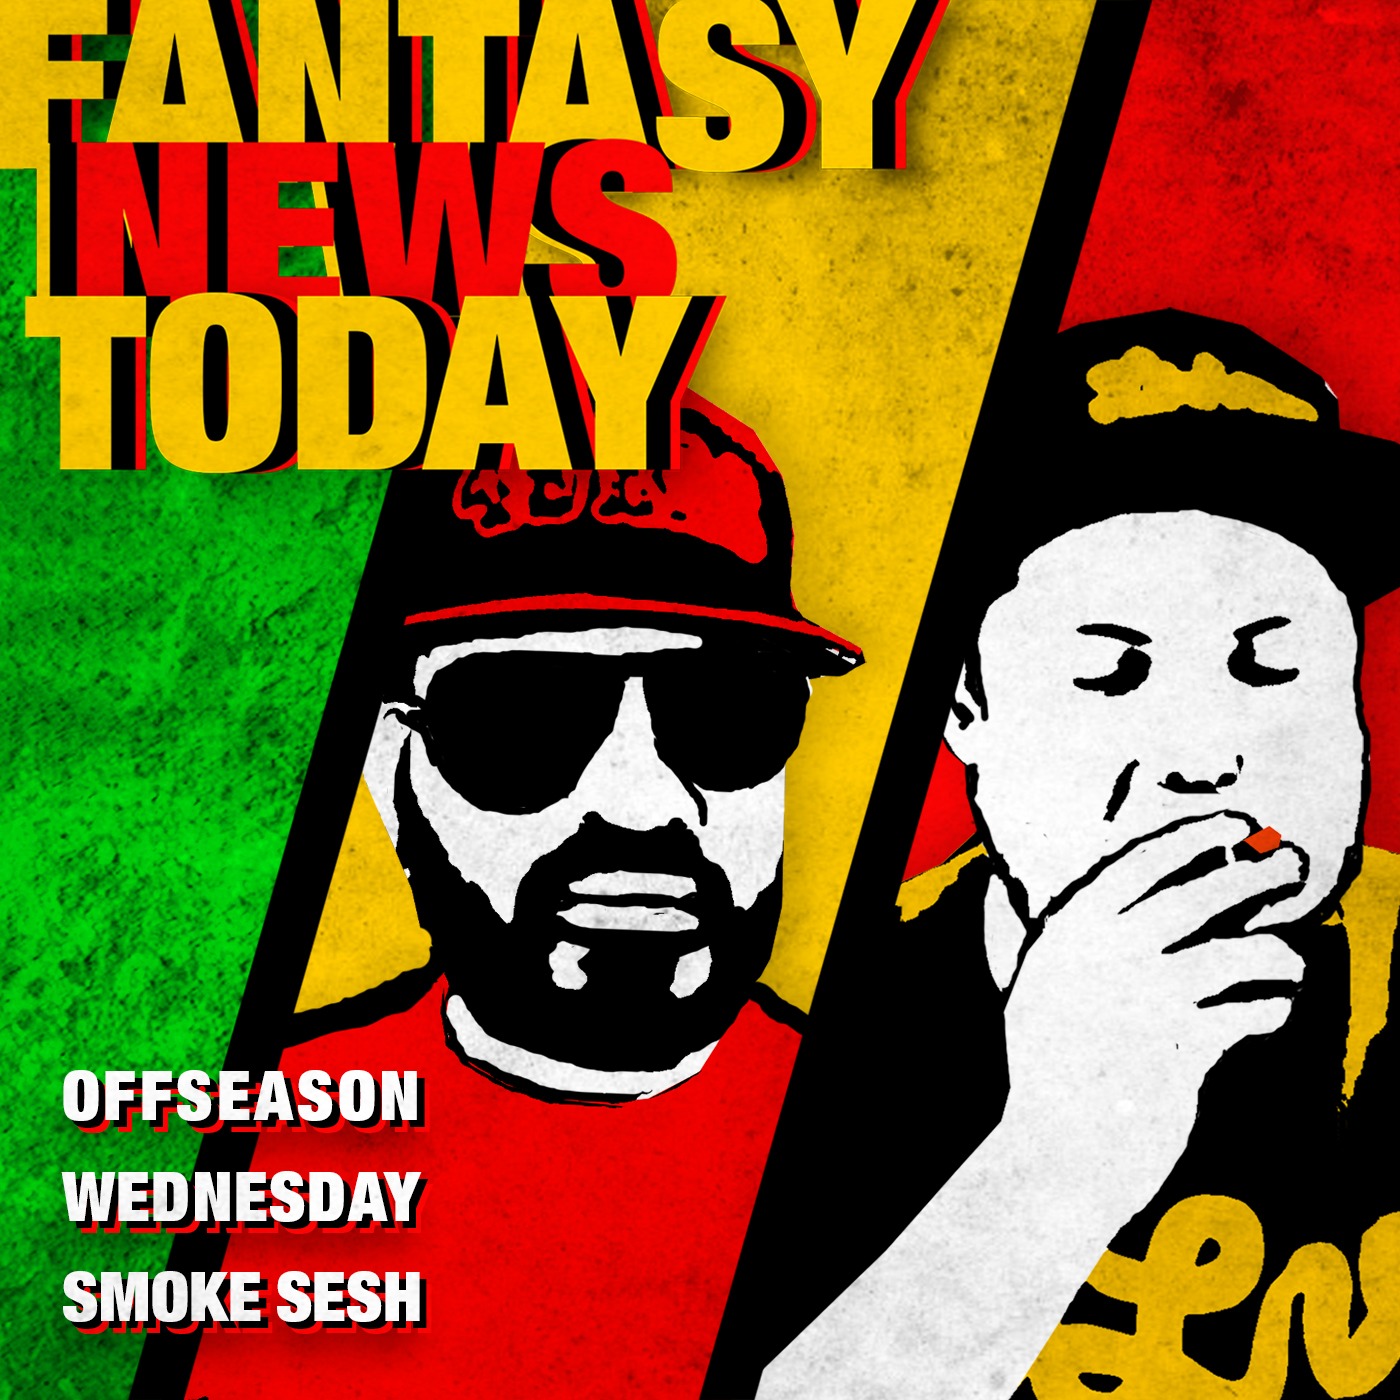 Fantasy Football News Today LIVE, Wednesday May 25th Image